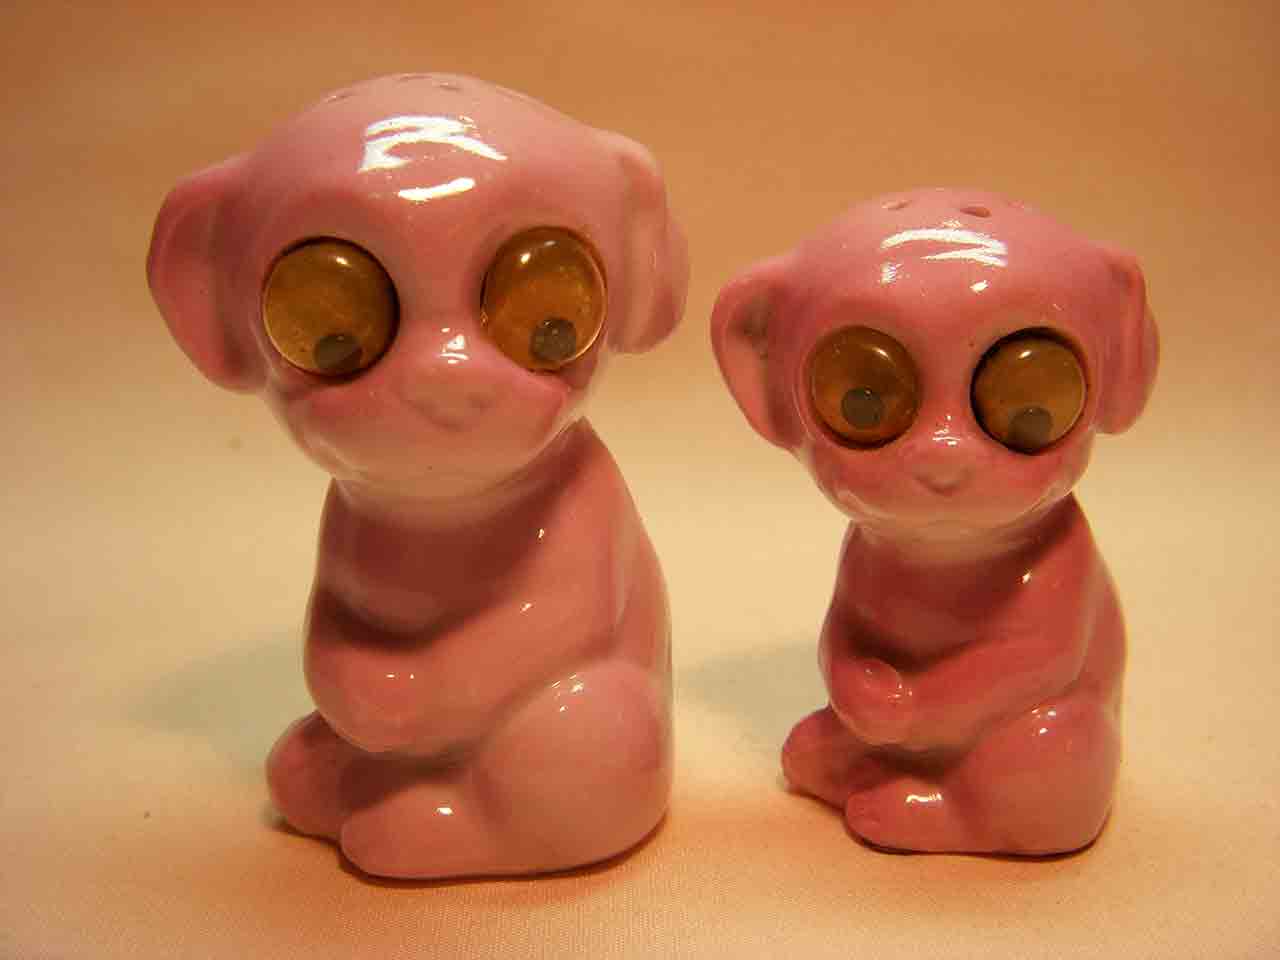 Germany google-eyed animal salt and pepper shakers - dogs